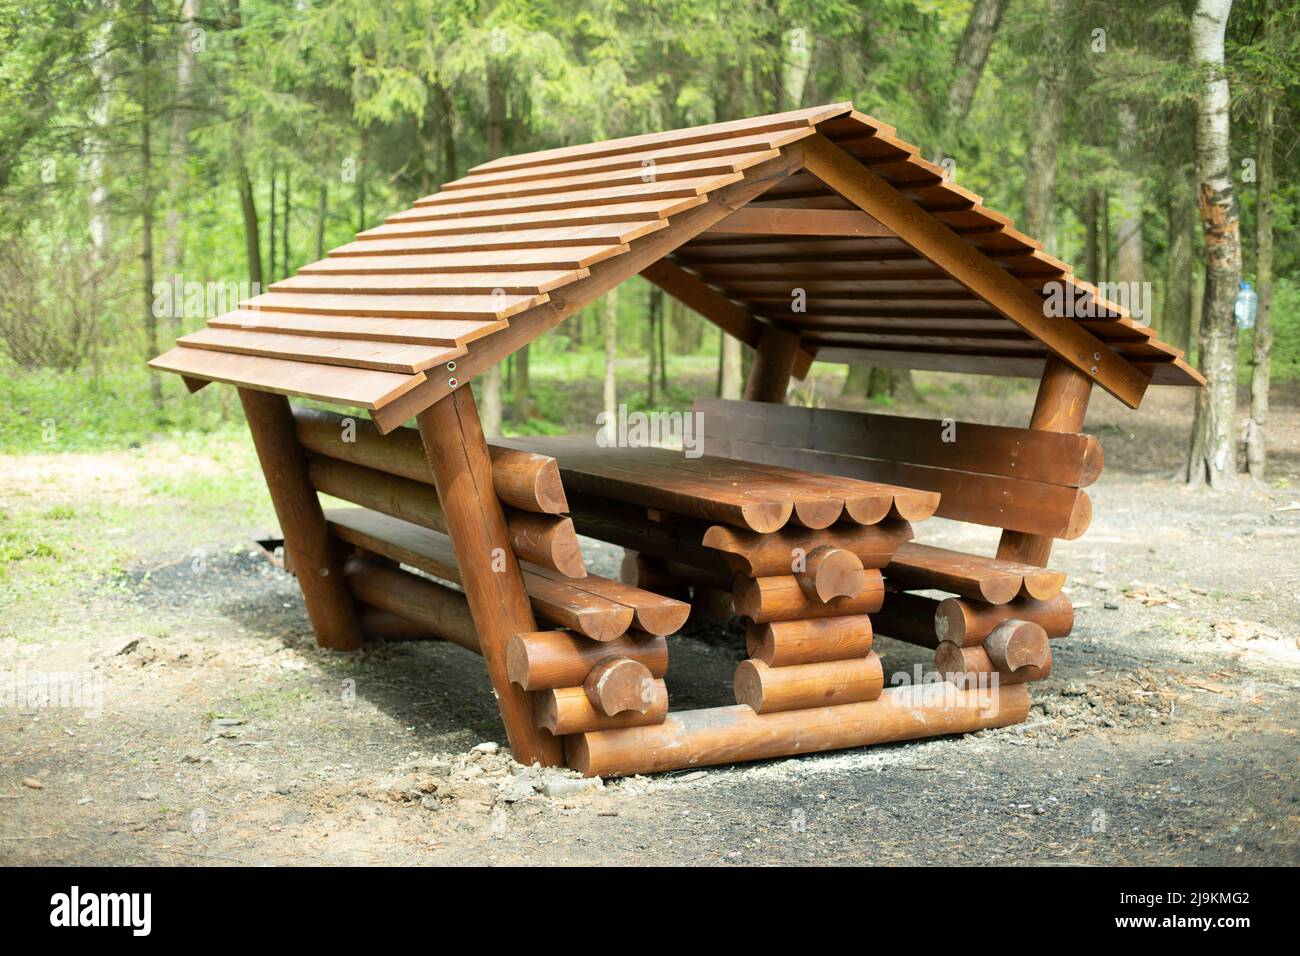 Cabin for relaxation in forest. Place for picnic in nature. Log structure. Place to relax. Stock Photo